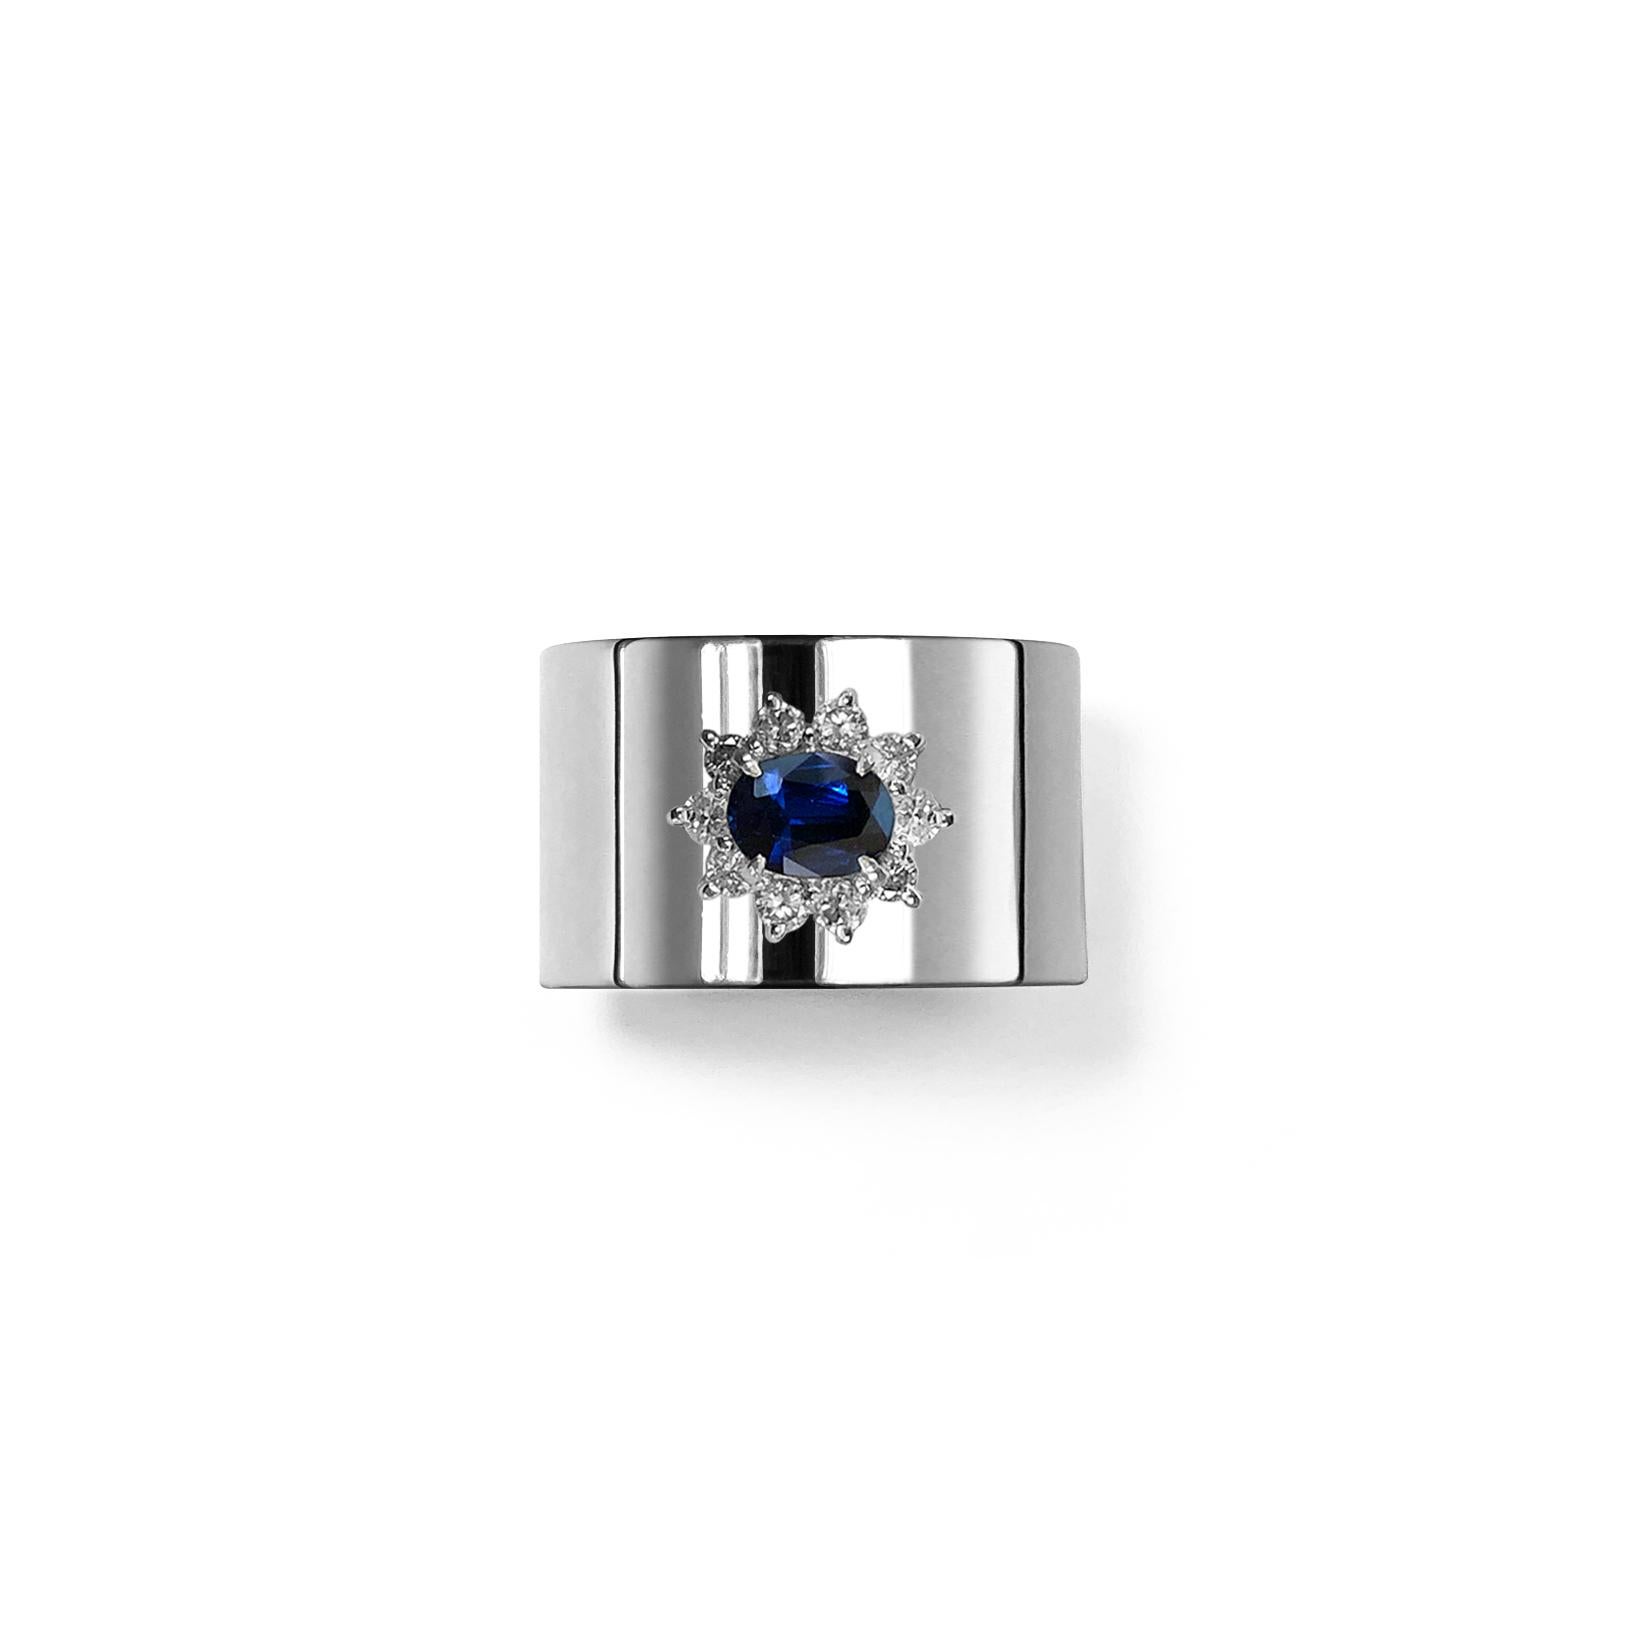 This luxurious wide-band platinum ring features deconstructed elements from repurposed vintage Sapphire stone settings in the center. These rare and classic settings were made by highly skilled craftsmen and includes brilliant cut diamonds. This is